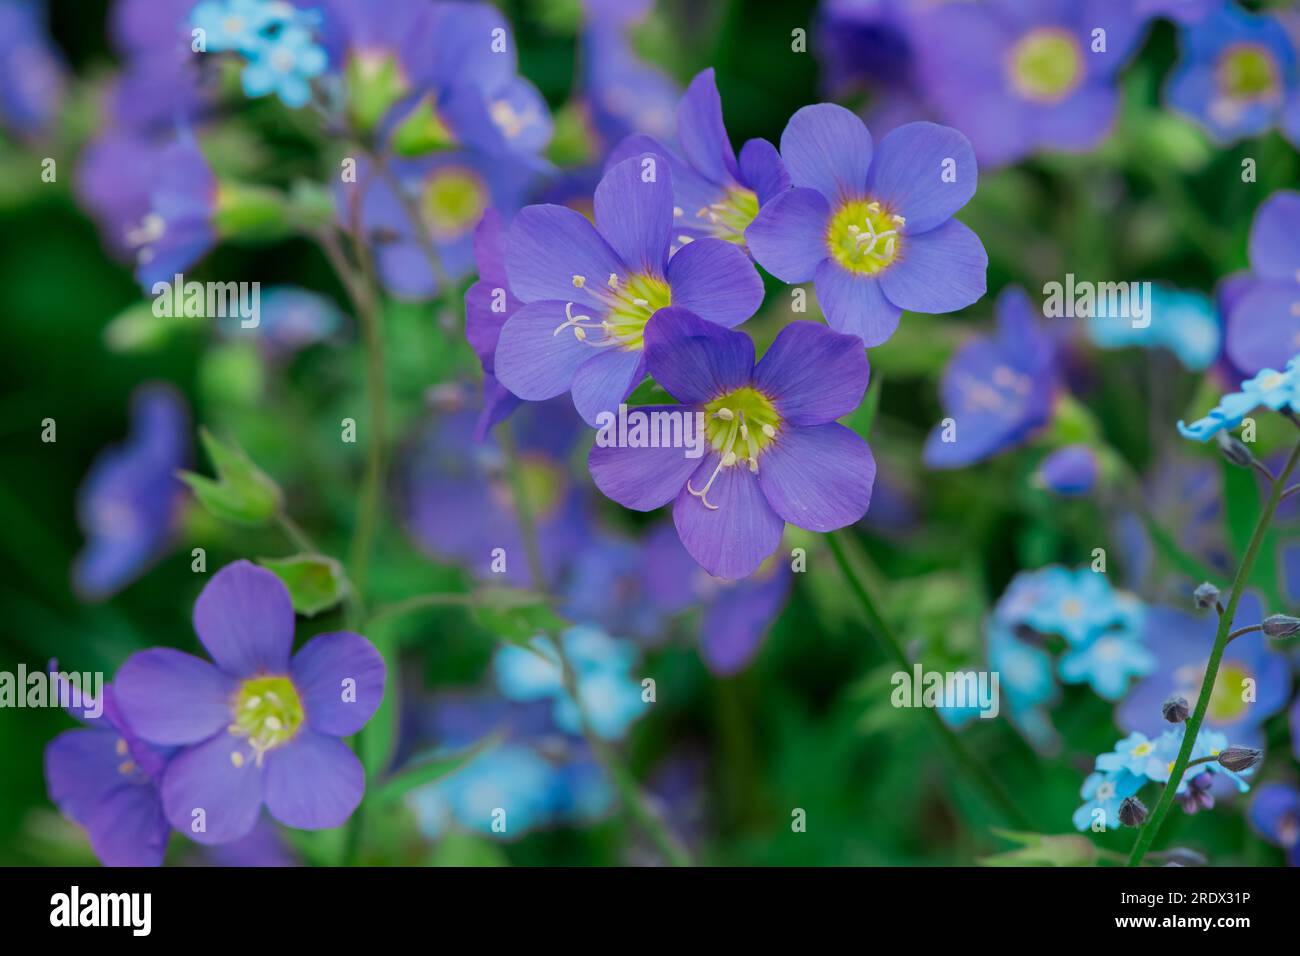 beautiful natural background with summer flowers Stock Photo